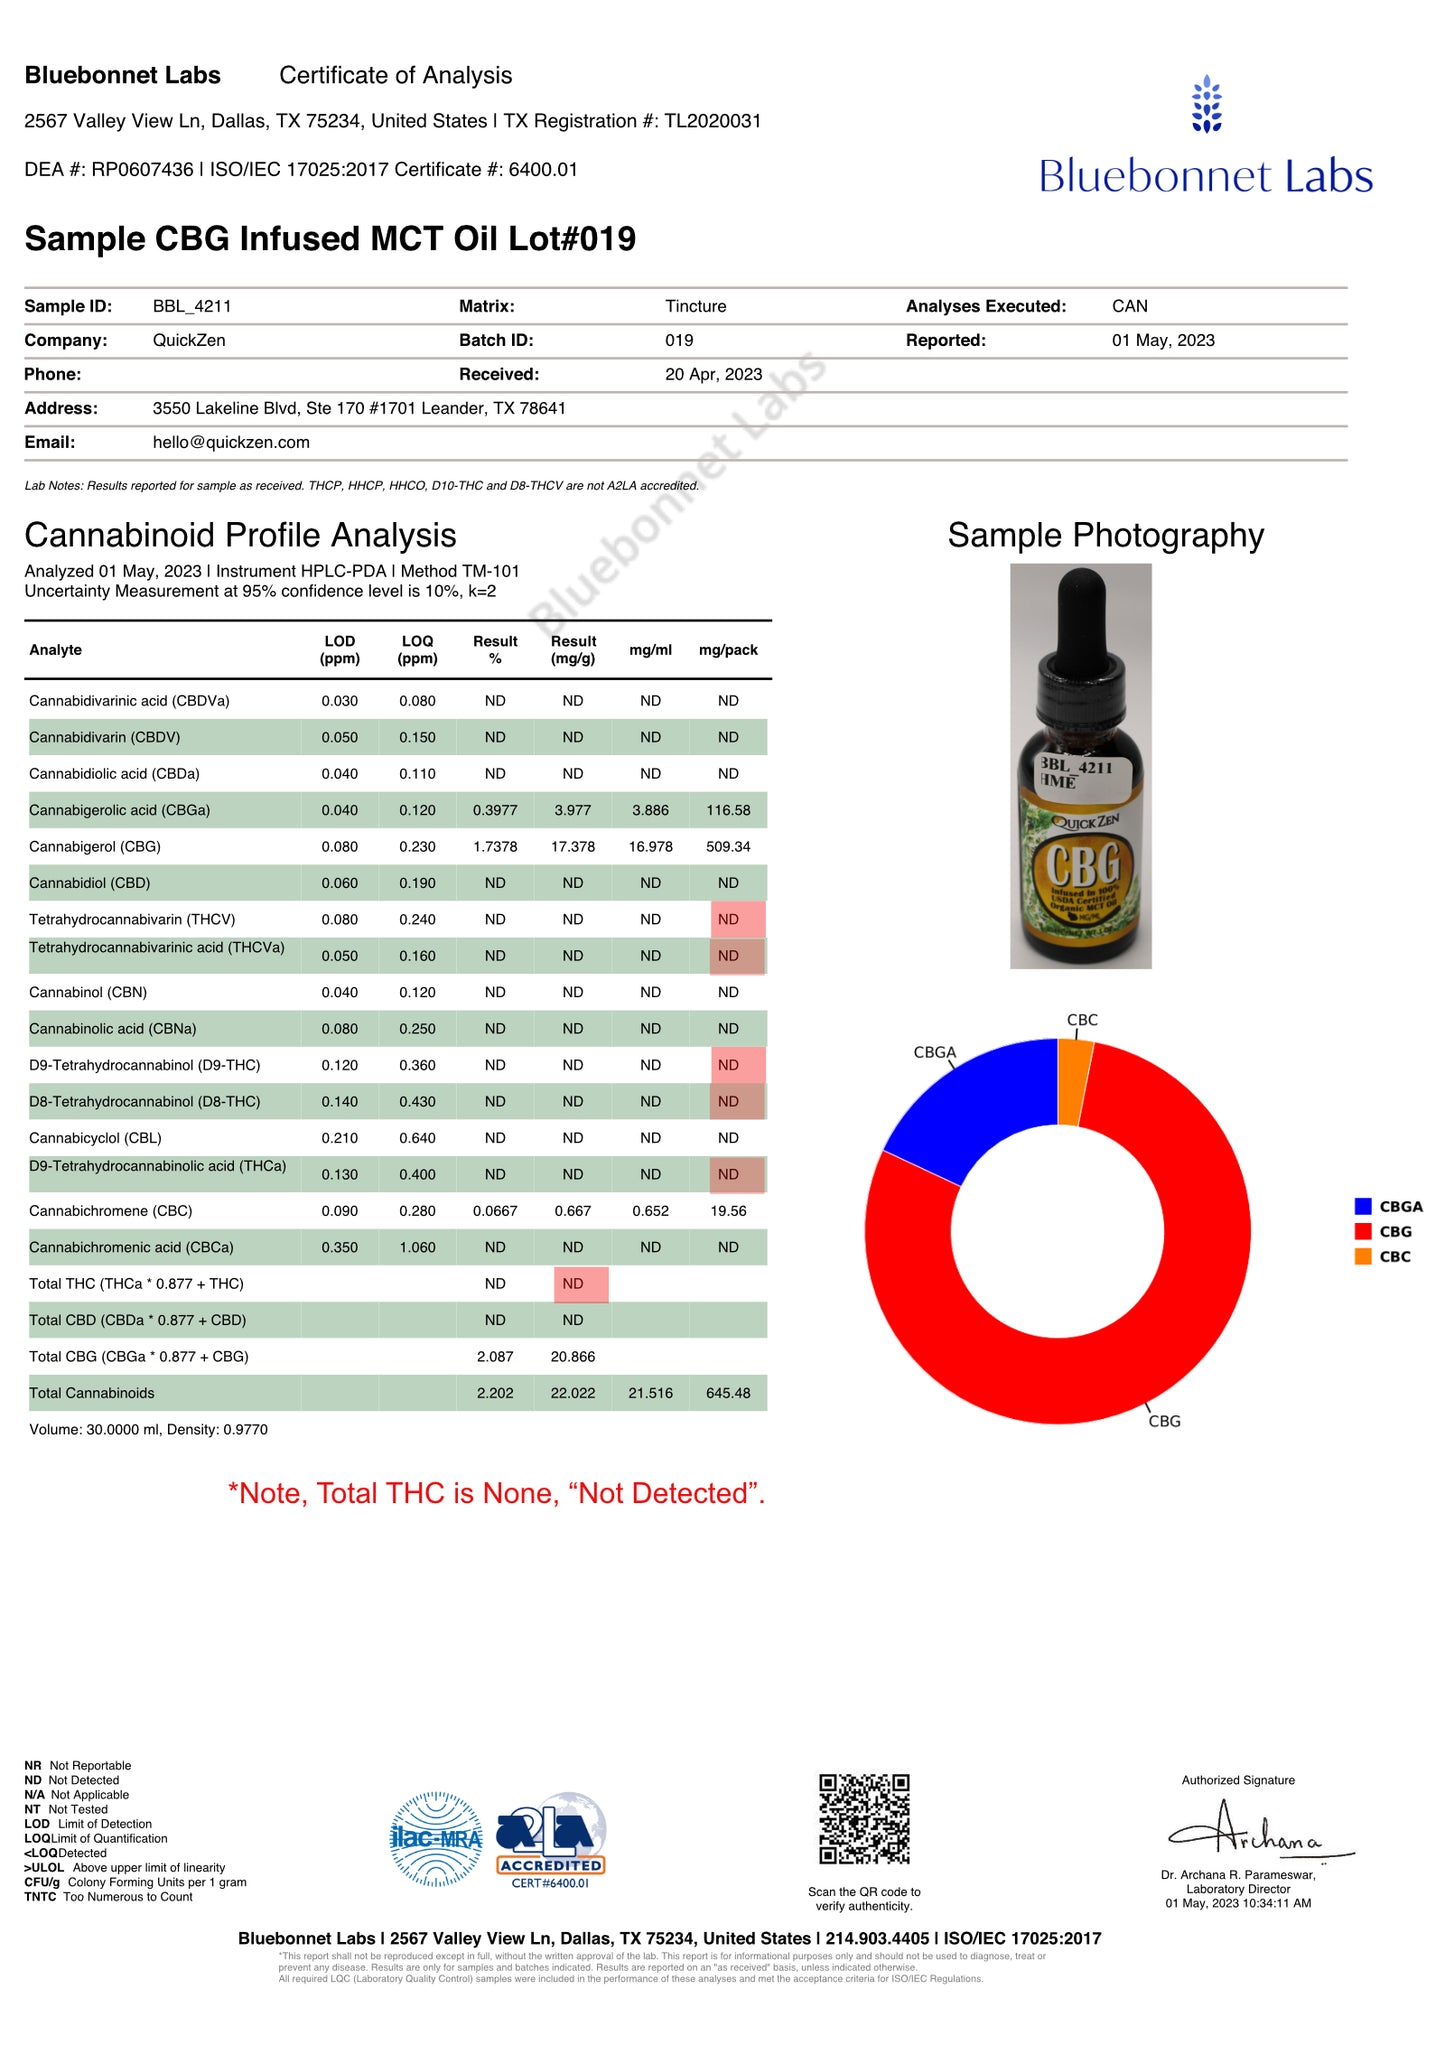 
                  
                    Lot 019 COA. Certificate of authenticity for cannabinoids analysis. CBG profile with pie chart breakdown.
                  
                